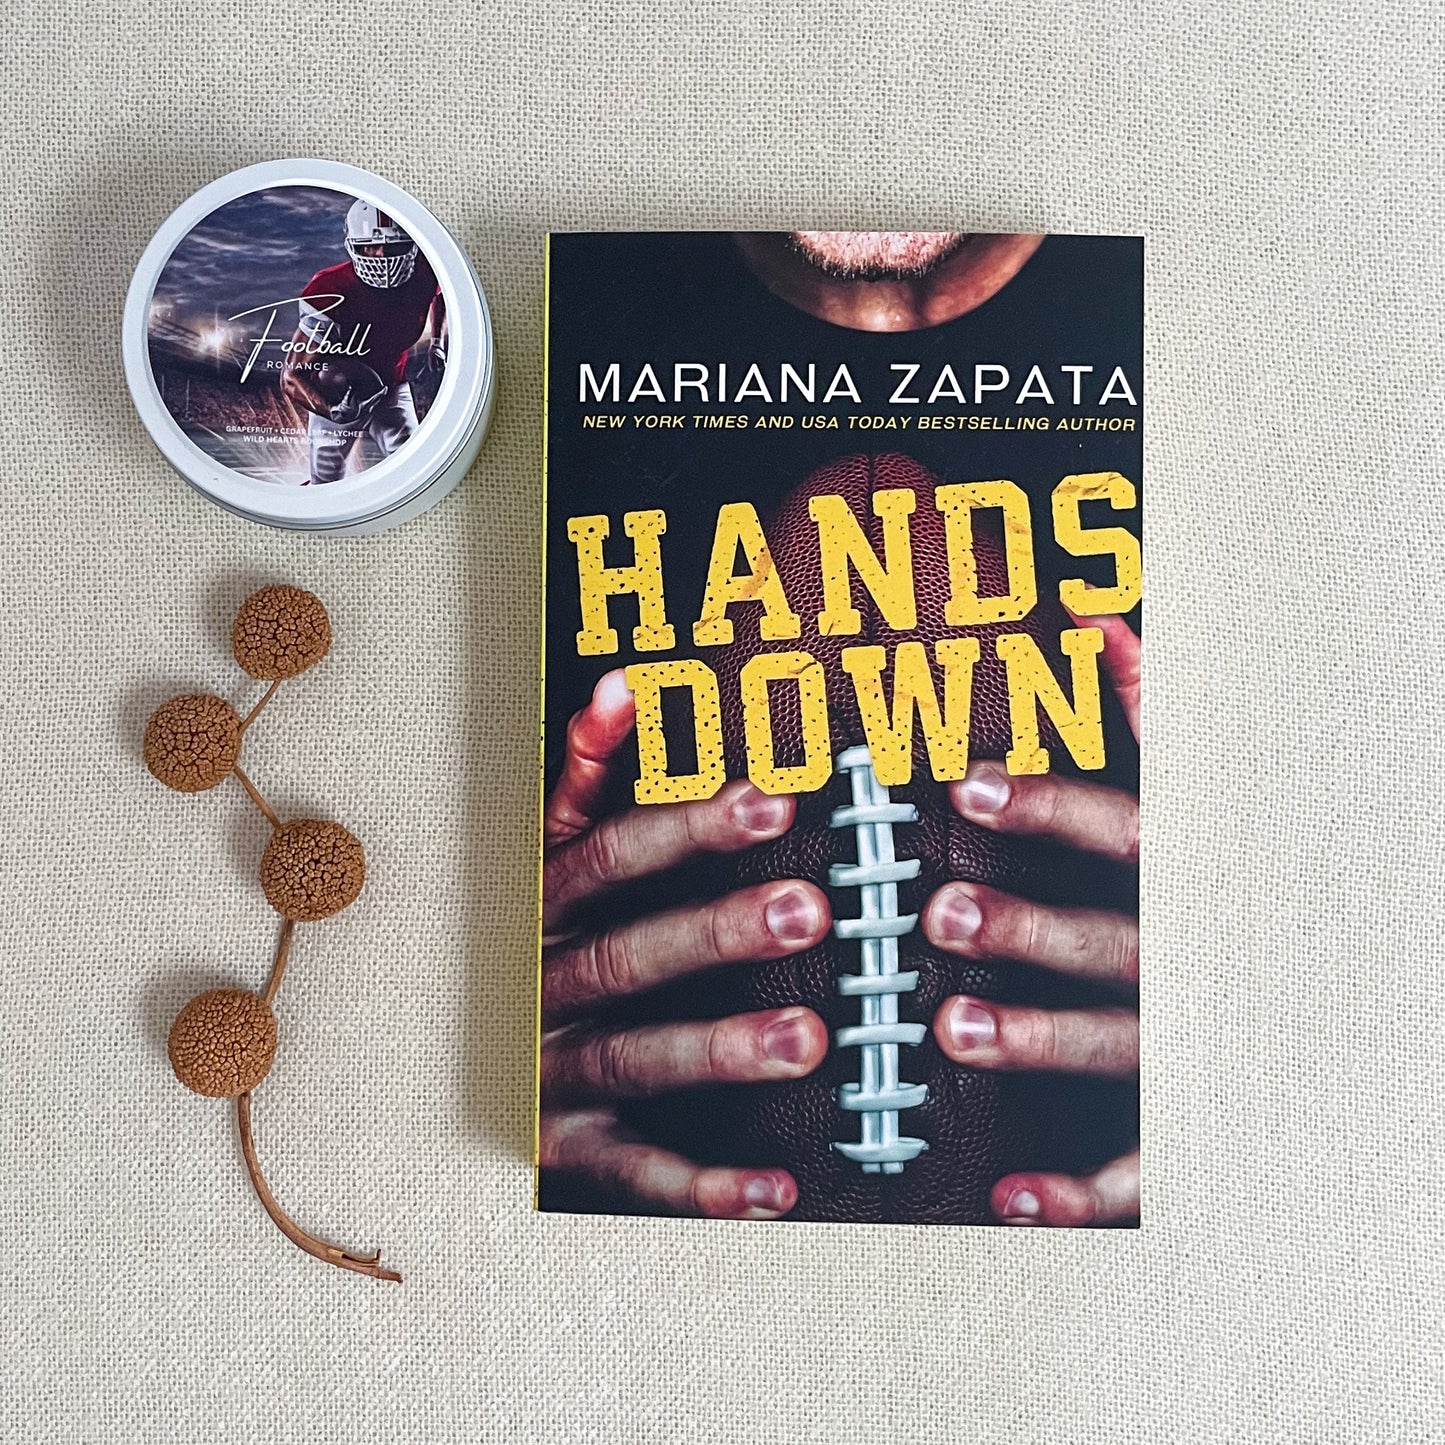 Hands Down by Mariana Zapata